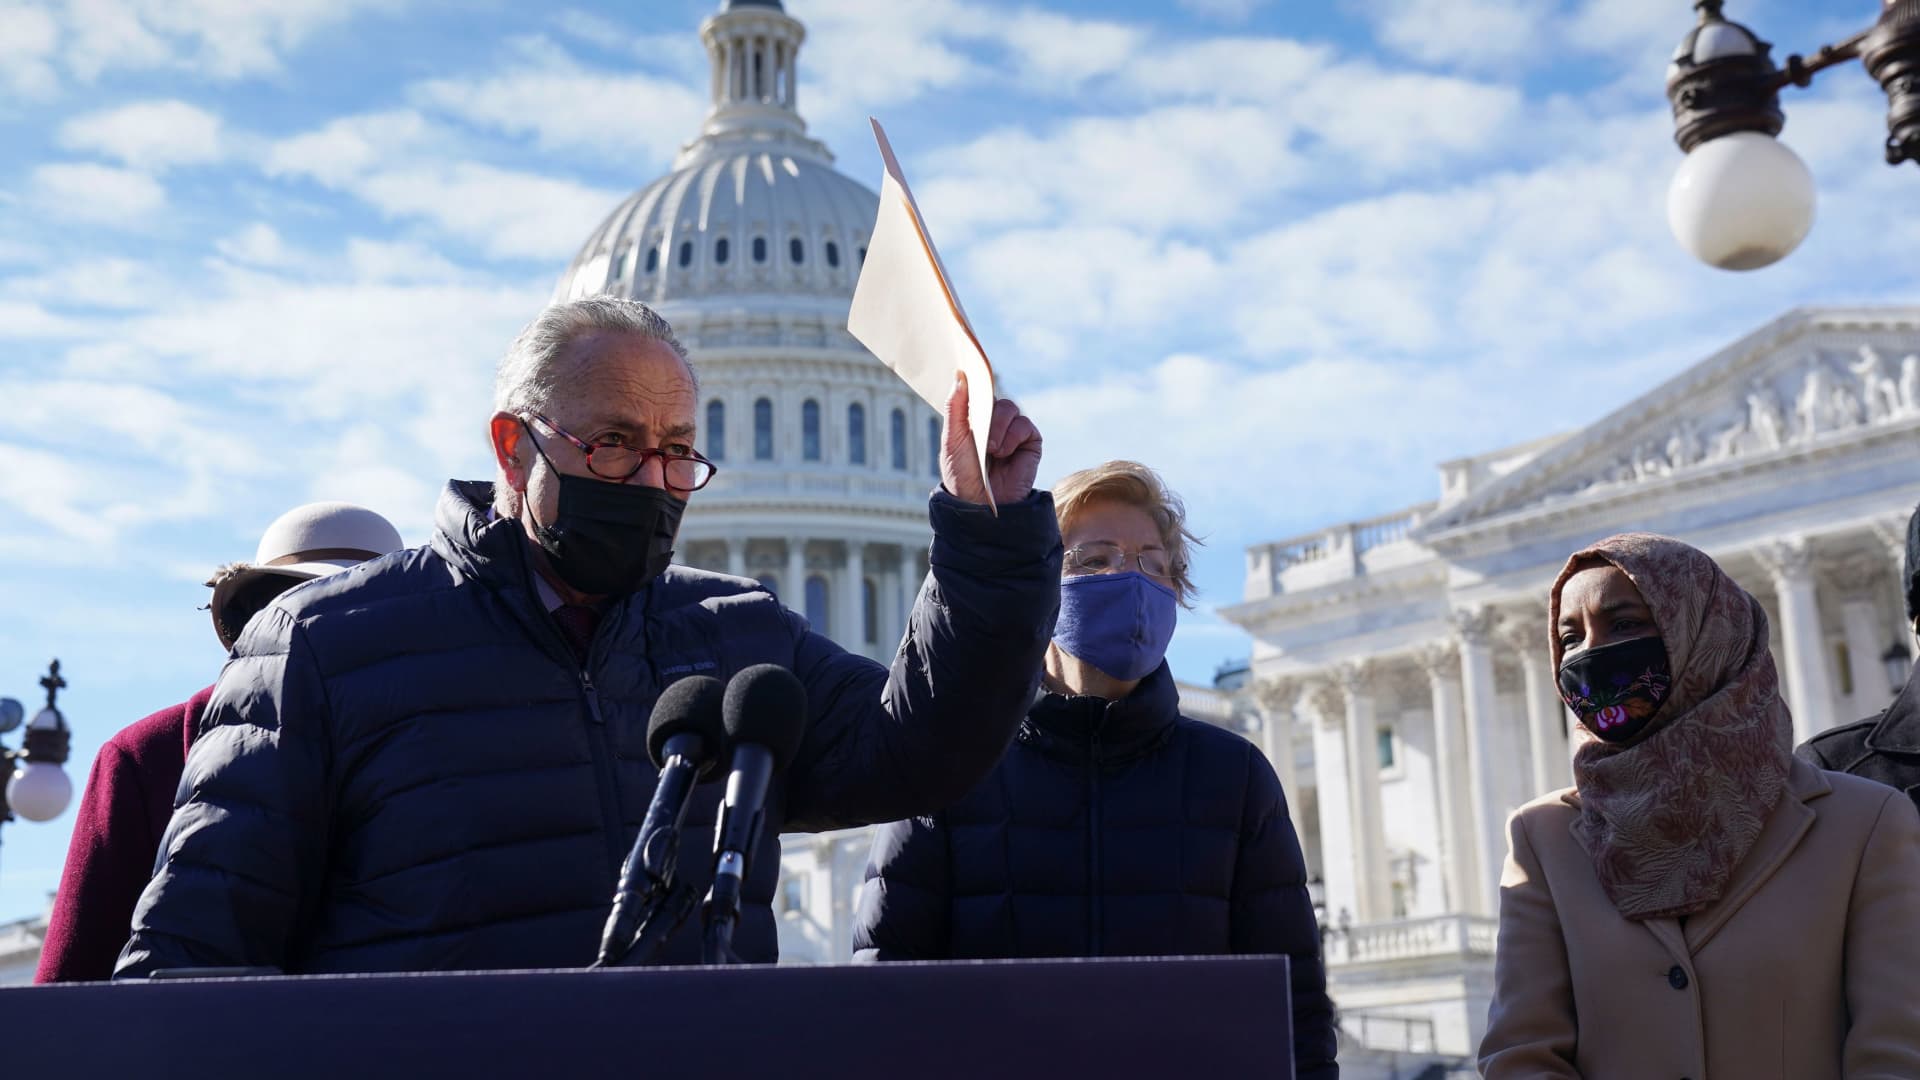 Senate Majority Leader Chuck Schumer (D-NY) holds a news conference to reintroduce a resolution to cancel up to $50,000 of student loan debt, at the Capitol in Washington, U.S., February 4, 2021.